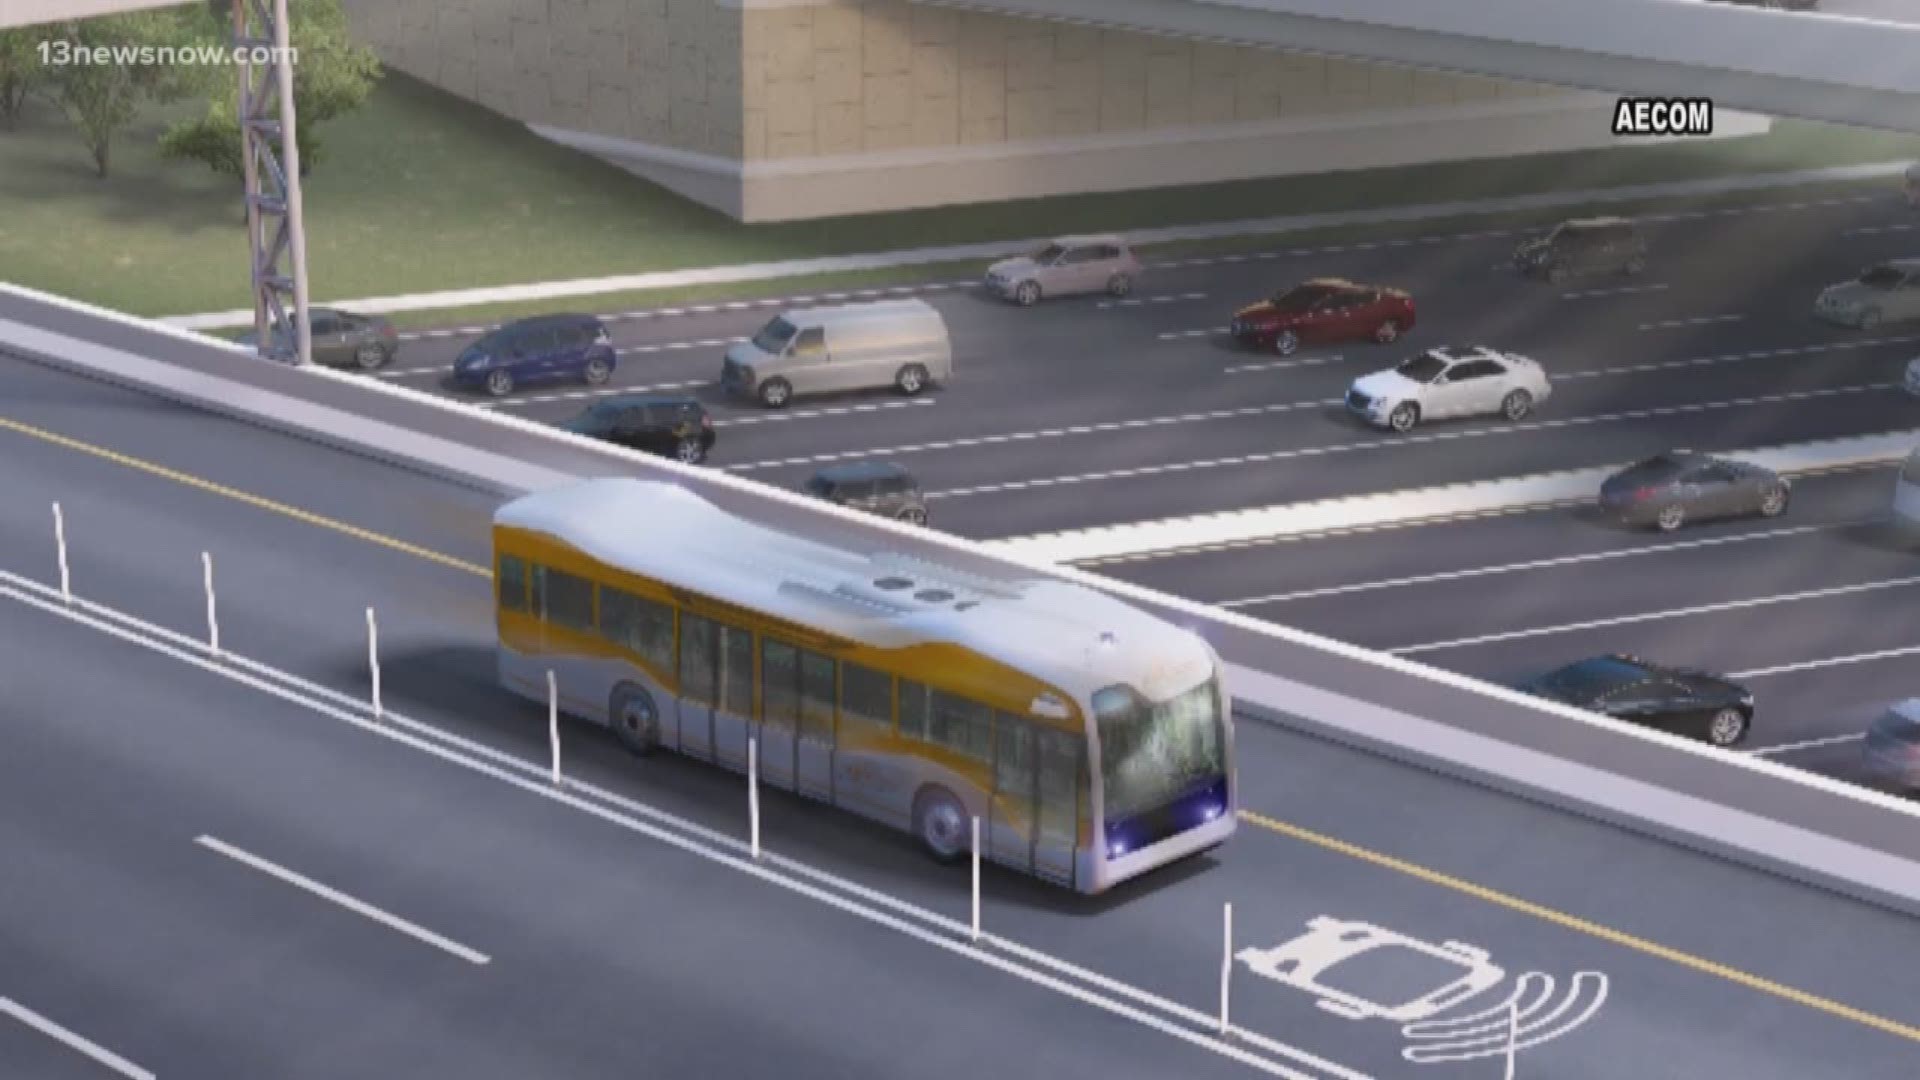 Hampton Roads Transit officials said they were picked to participate because the area is relatively flat and humid, but it also floods. The buses will be electric. Not everyone supports the idea.